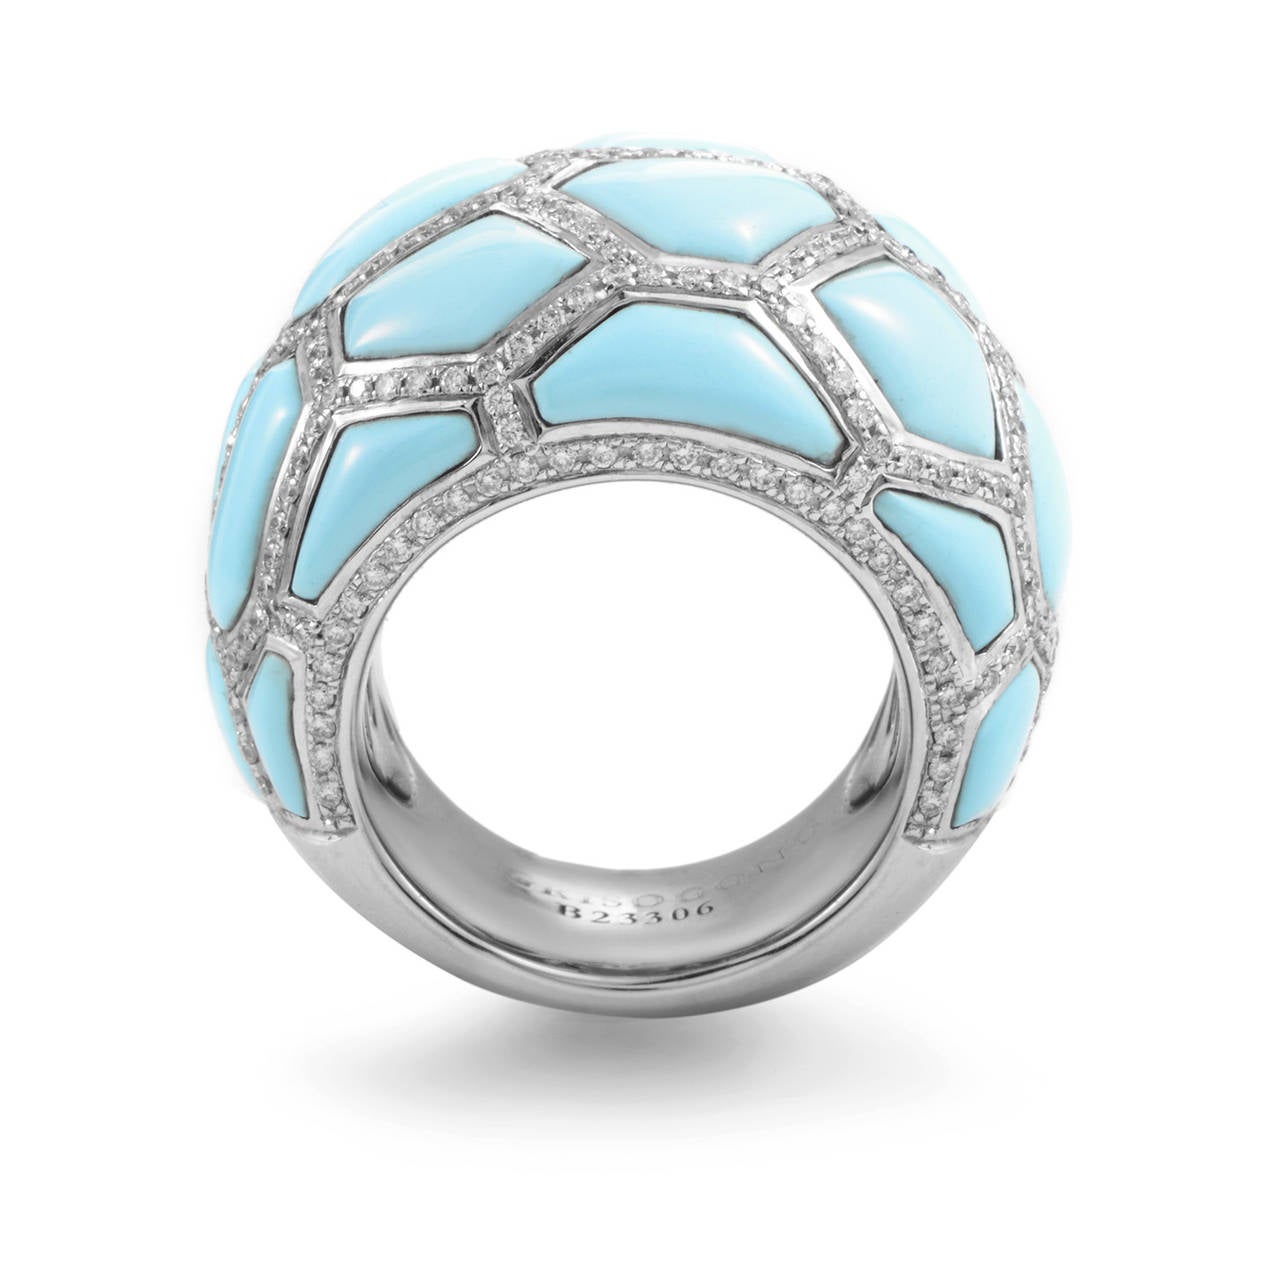 Upgrade your fashion with this simple yet stylish de Grisogono 18K white gold diamond ring. The outer surface of the ring is also adorned with 17 carats of turquoise, whose light blue color dovetails perfectly with the dazzle of the